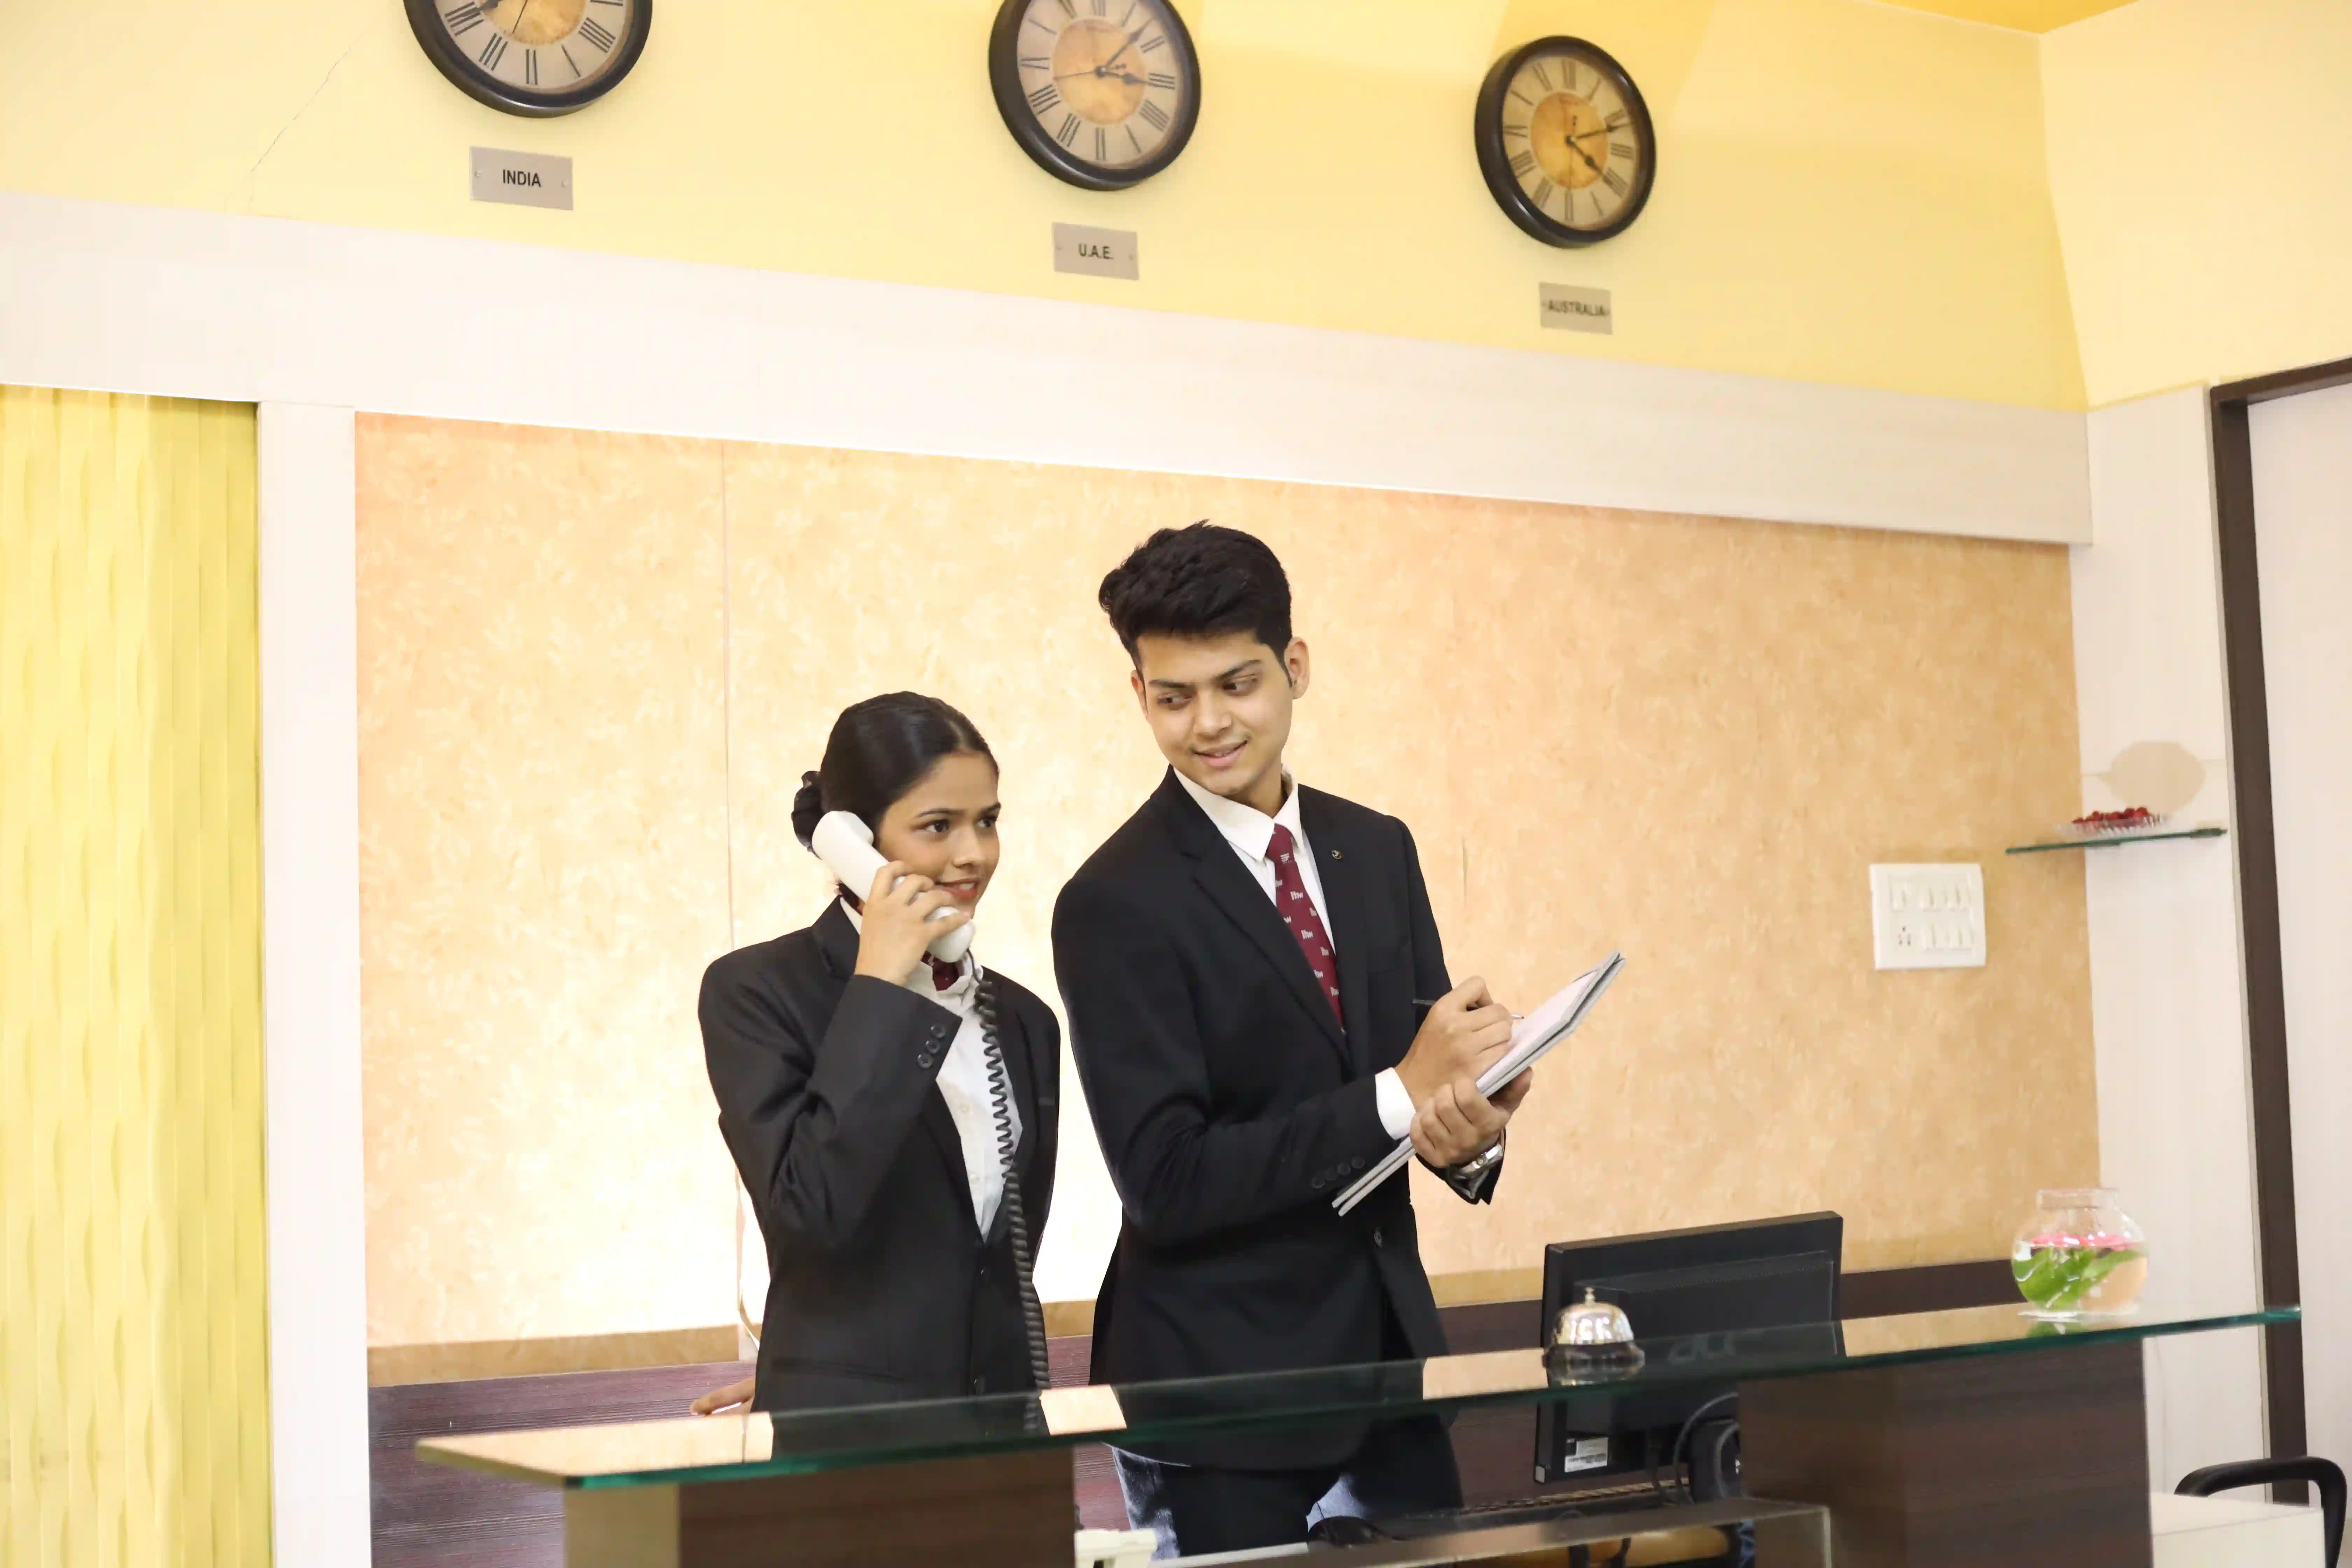 Why do students enroll in Hotel management courses after 12th